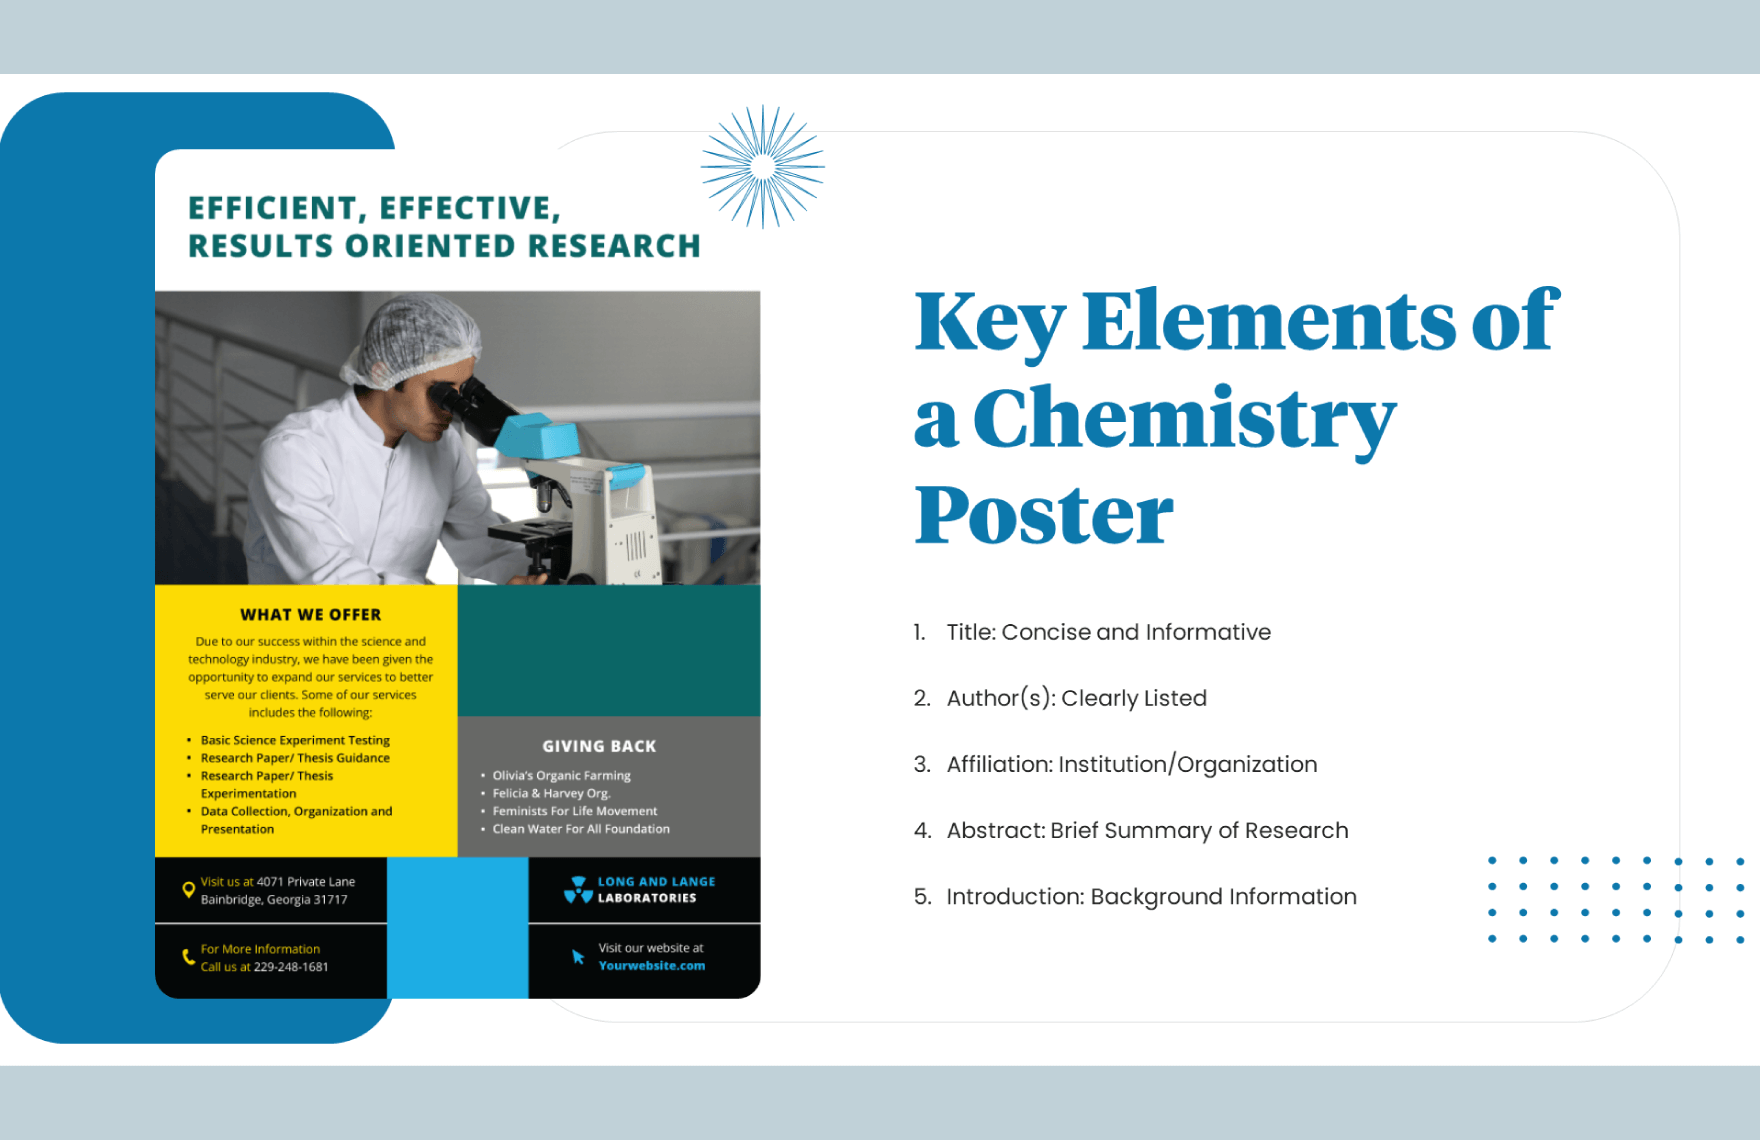 Chemistry Poster Template